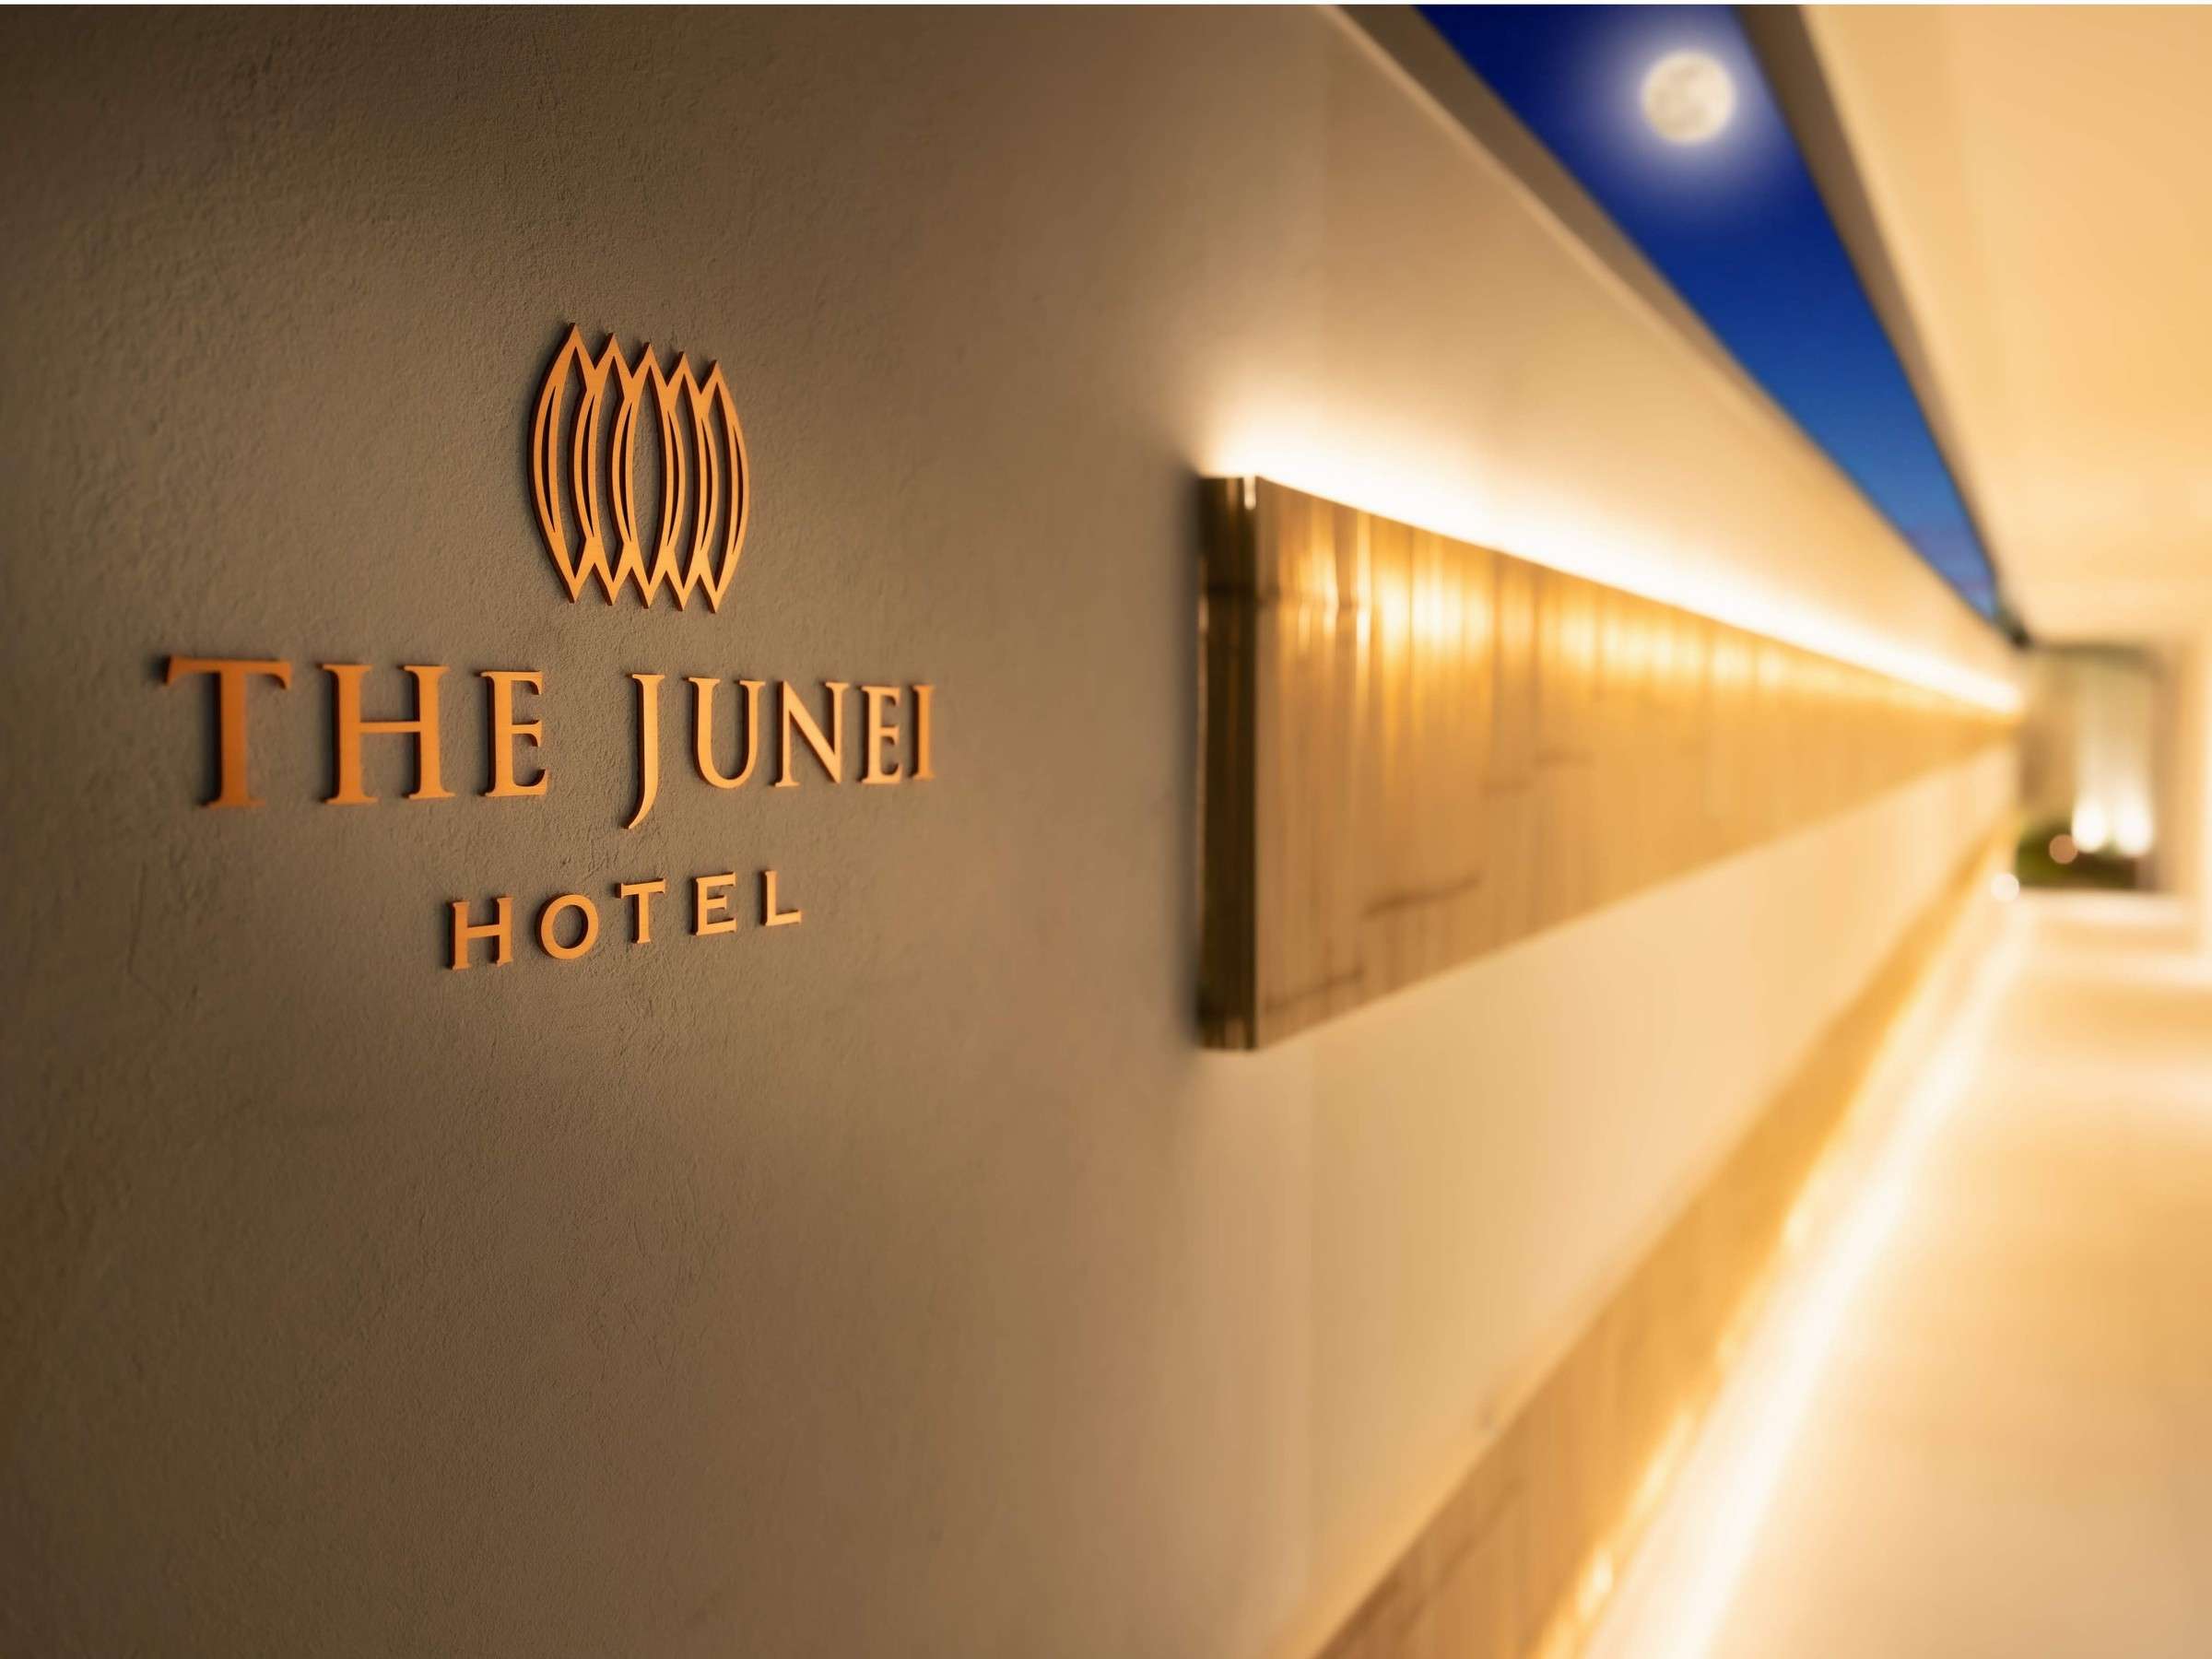 THE JUNEI HOTEL s